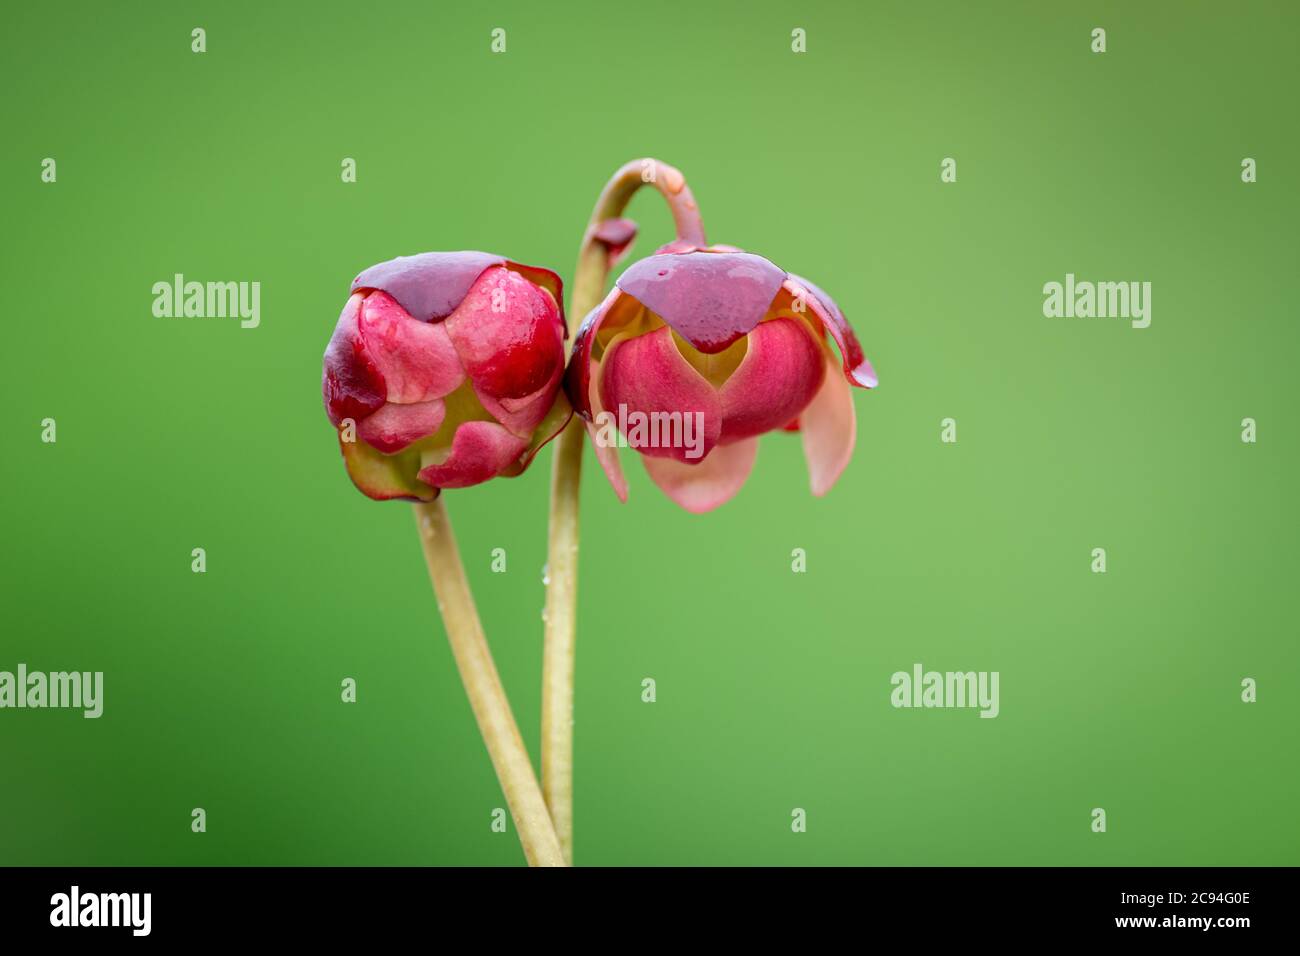 Two purple pitcher plant flowers, sarracenia purpurea, rosette shapes.The carnivorous plants have leaf like petals, purple and red in color. Stock Photo